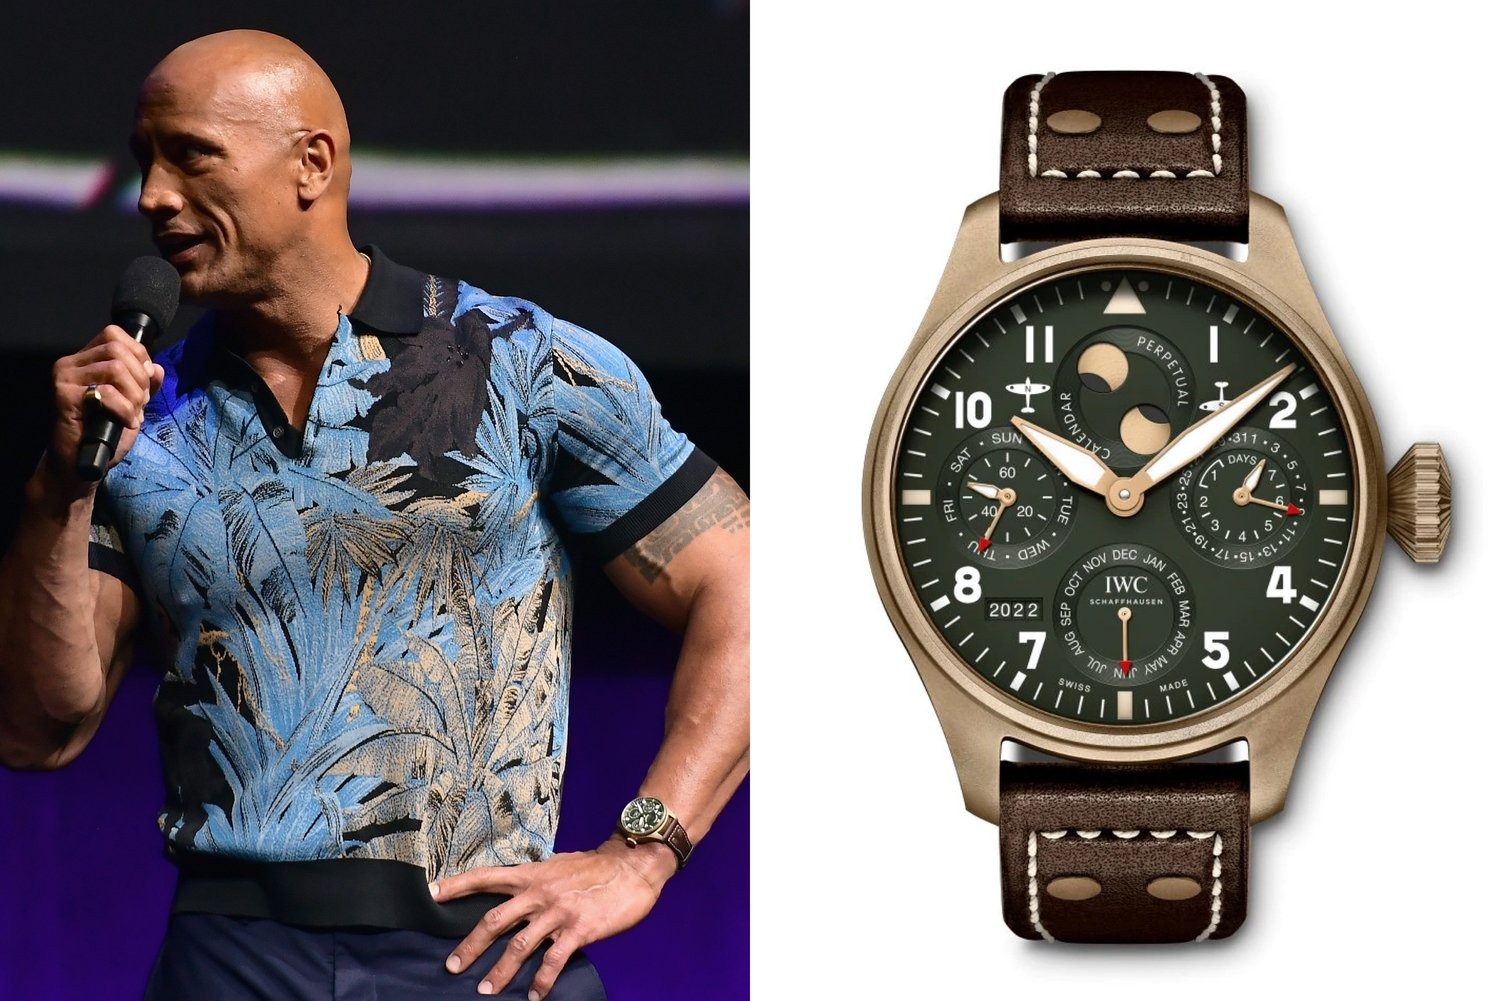 Admire the most expensive watches in The Rock’s personal collection